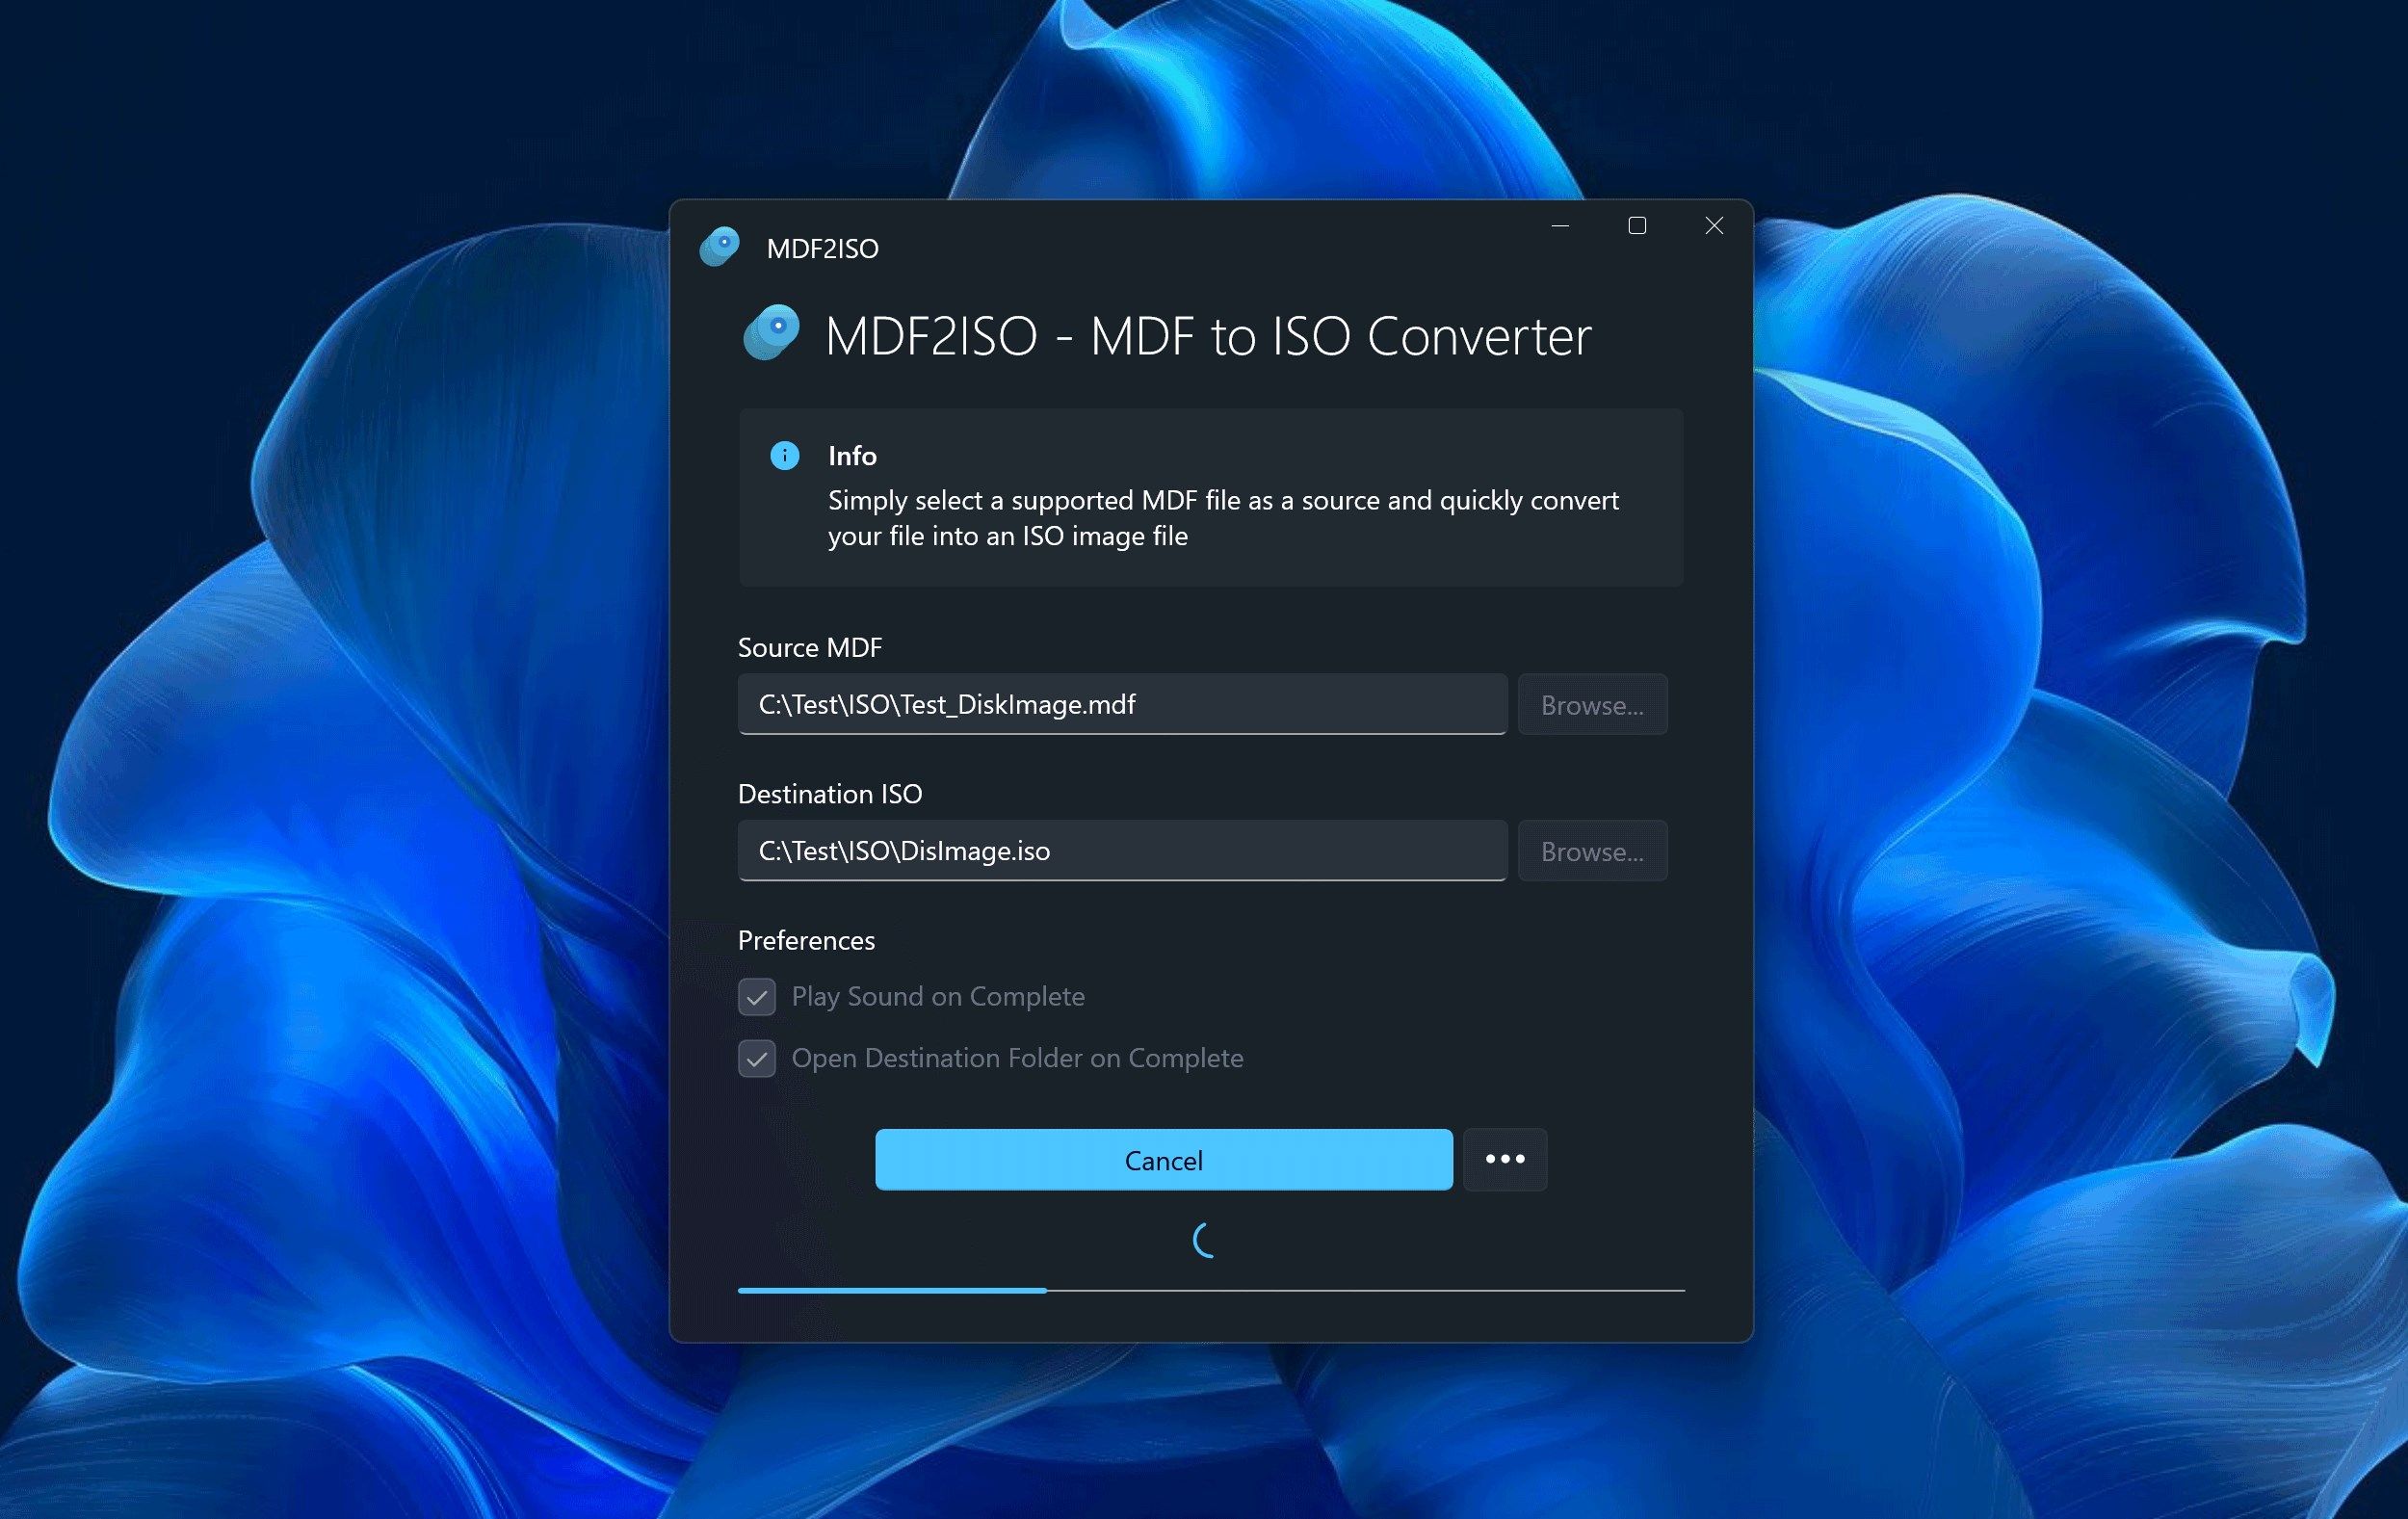 MDF2ISO - MDF to ISO Converter